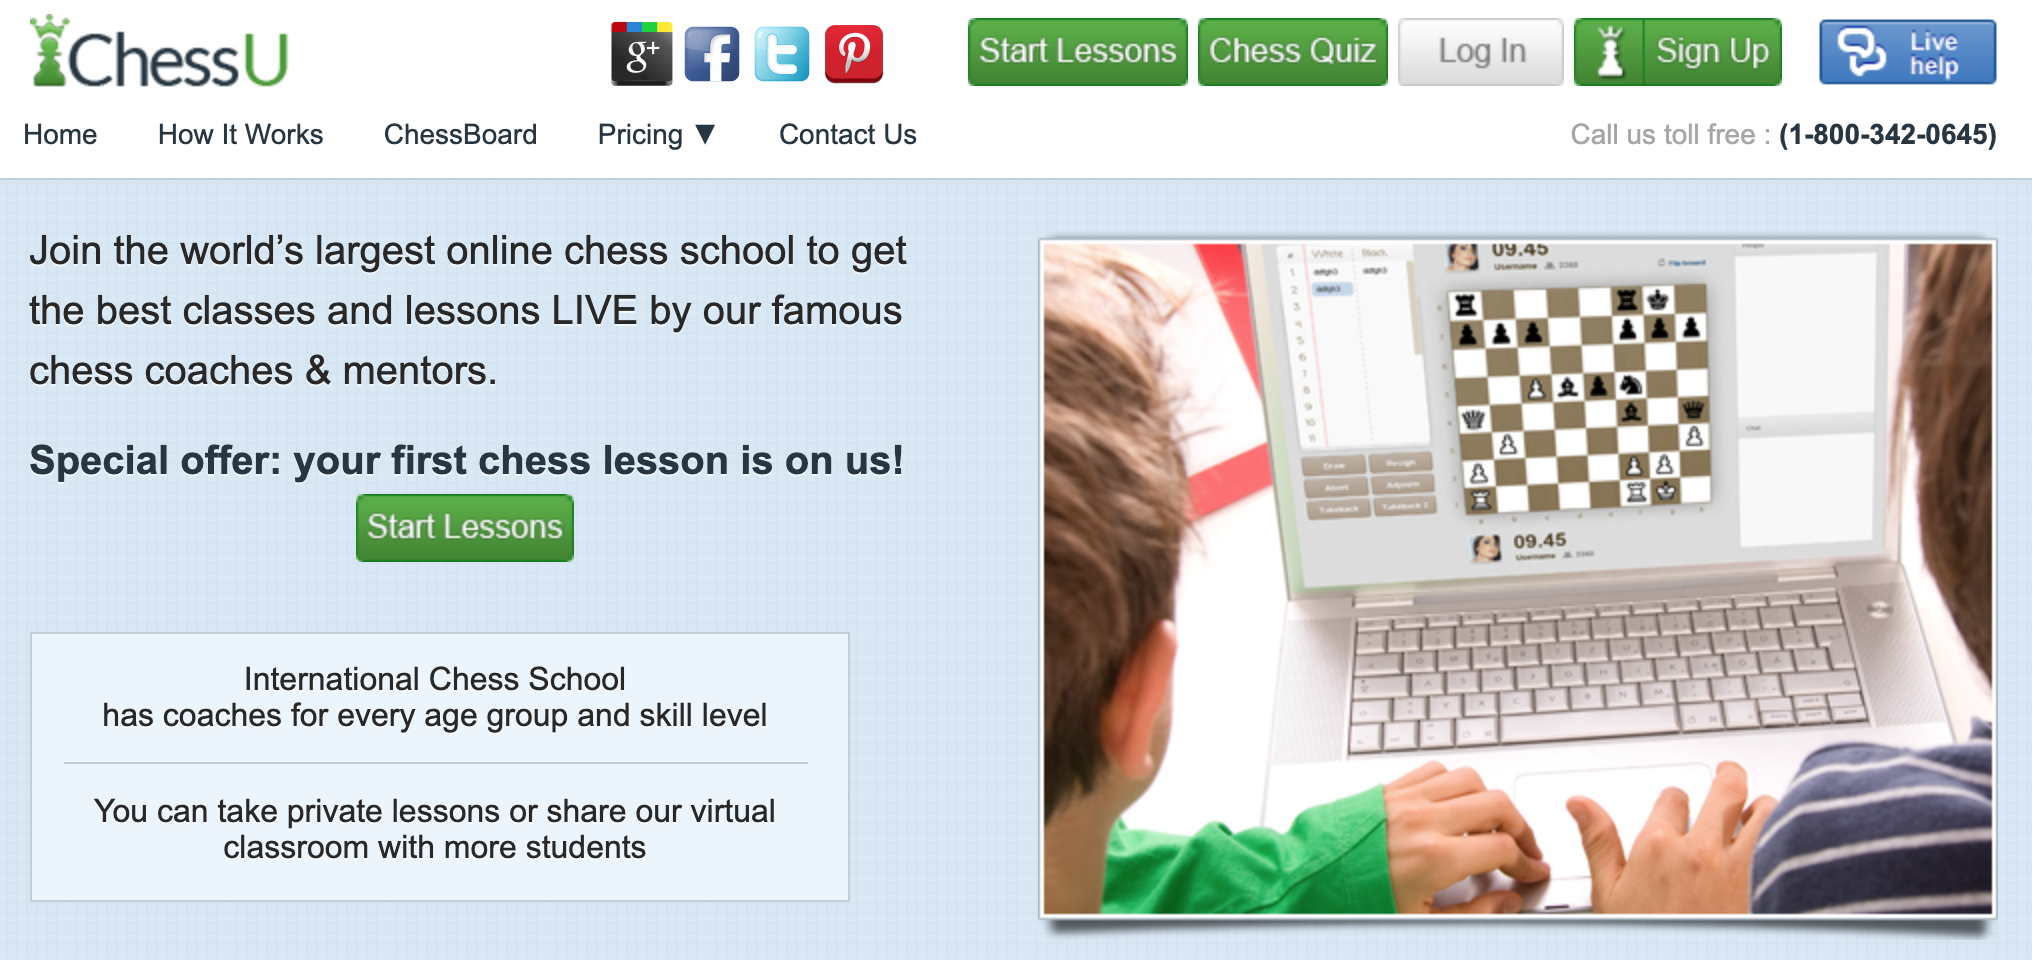 Chess Coaching: How to Start Providing Online Chess Lessons